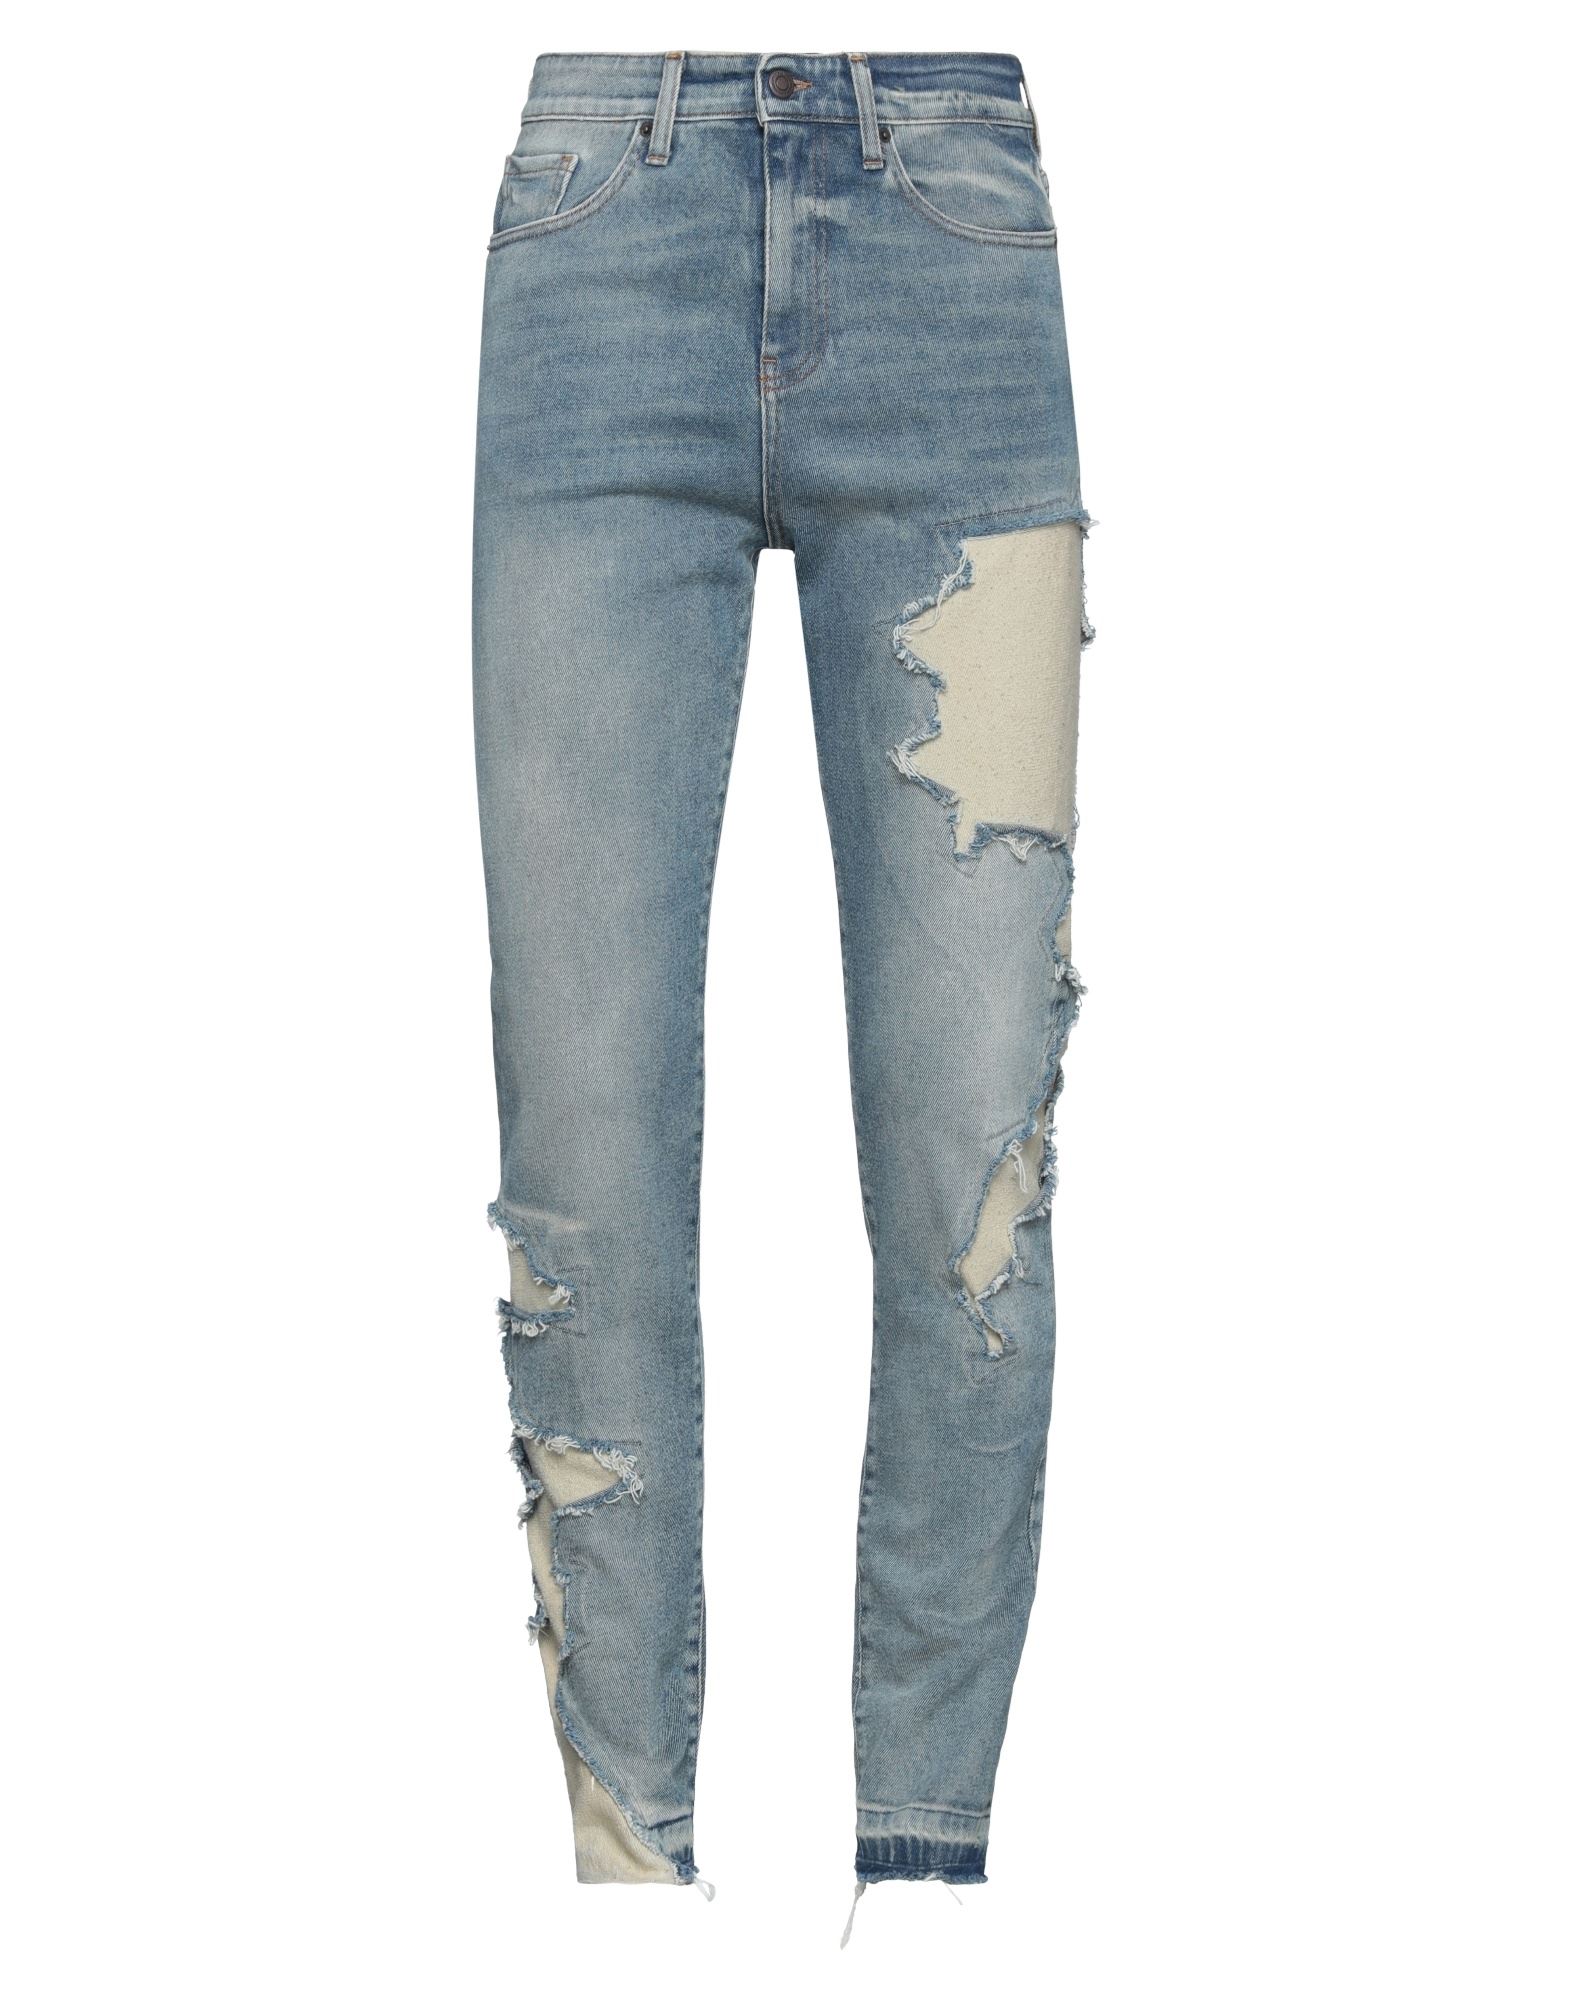 VAL KRISTOPHER JEANS